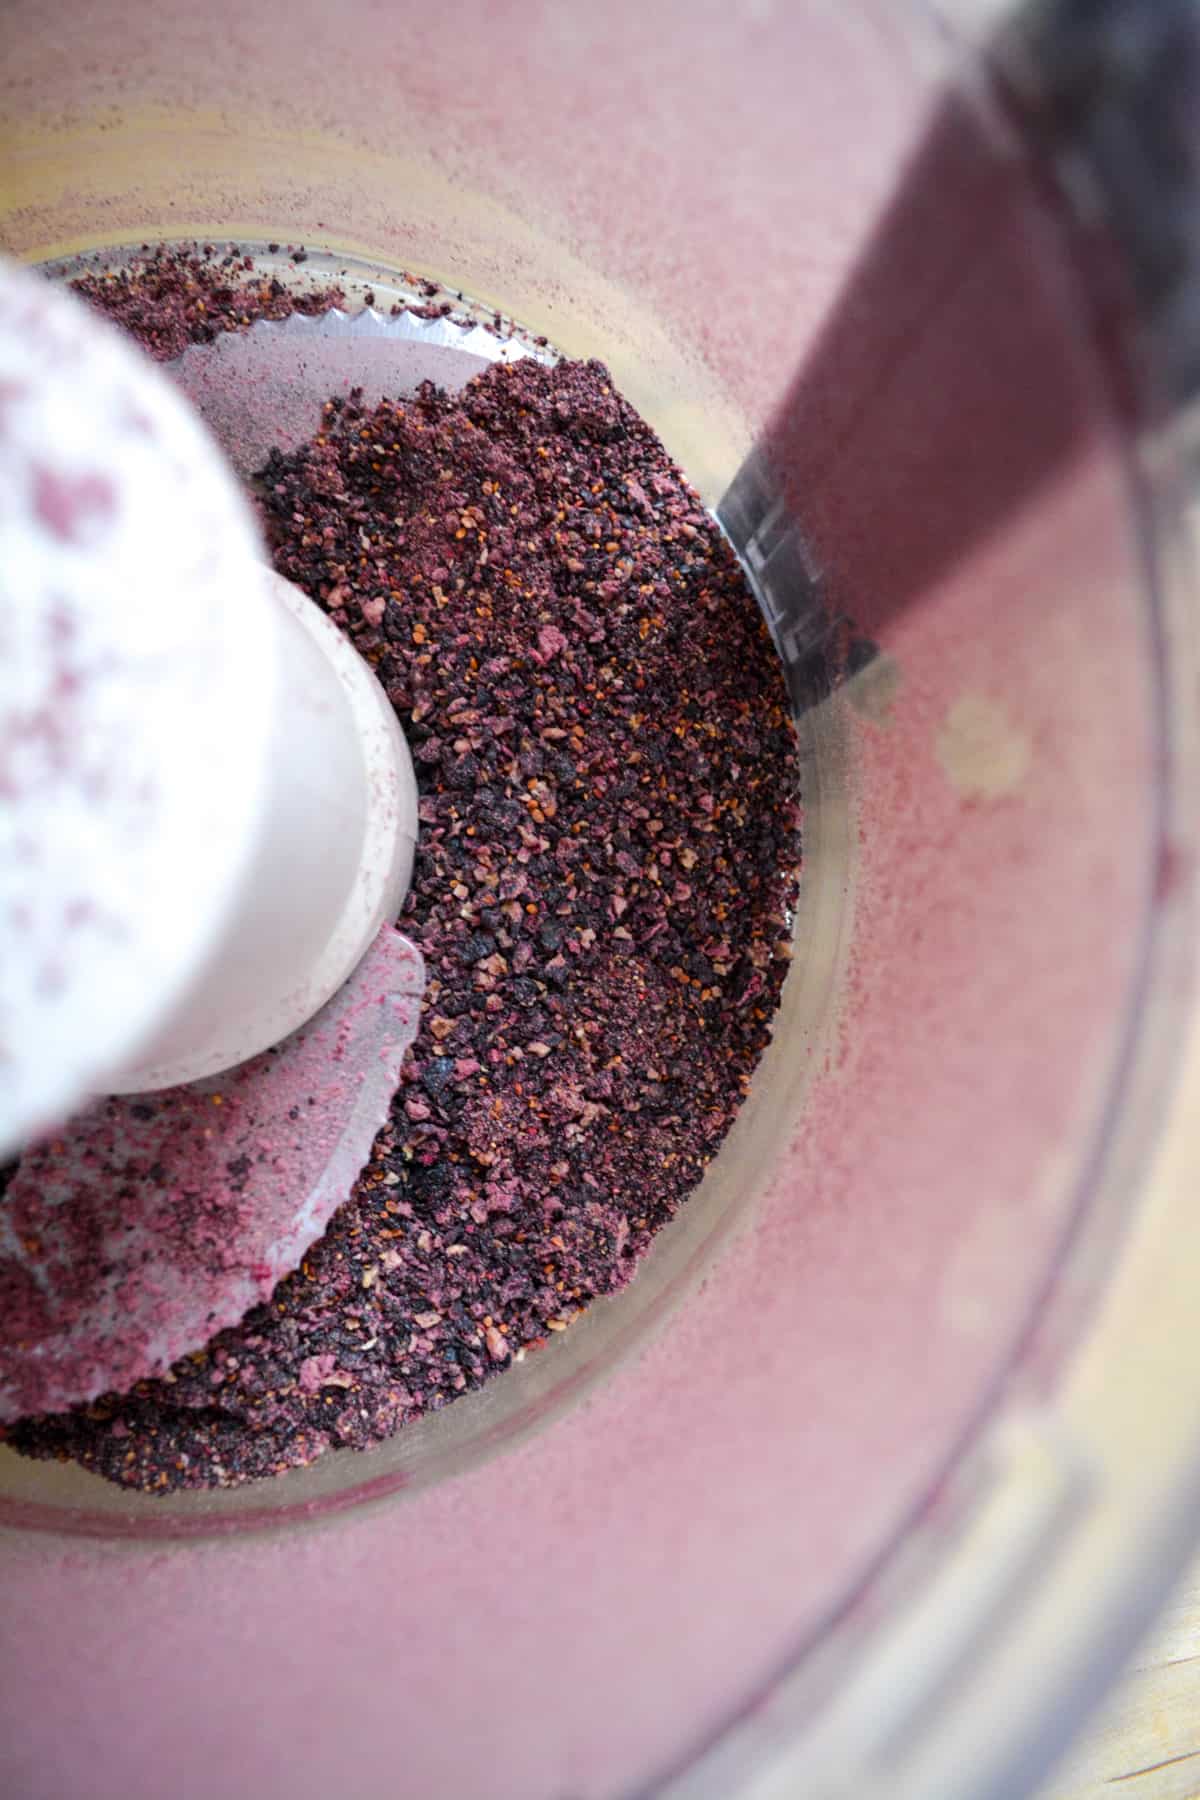 Ground freeze-dried blueberries in a food processor.